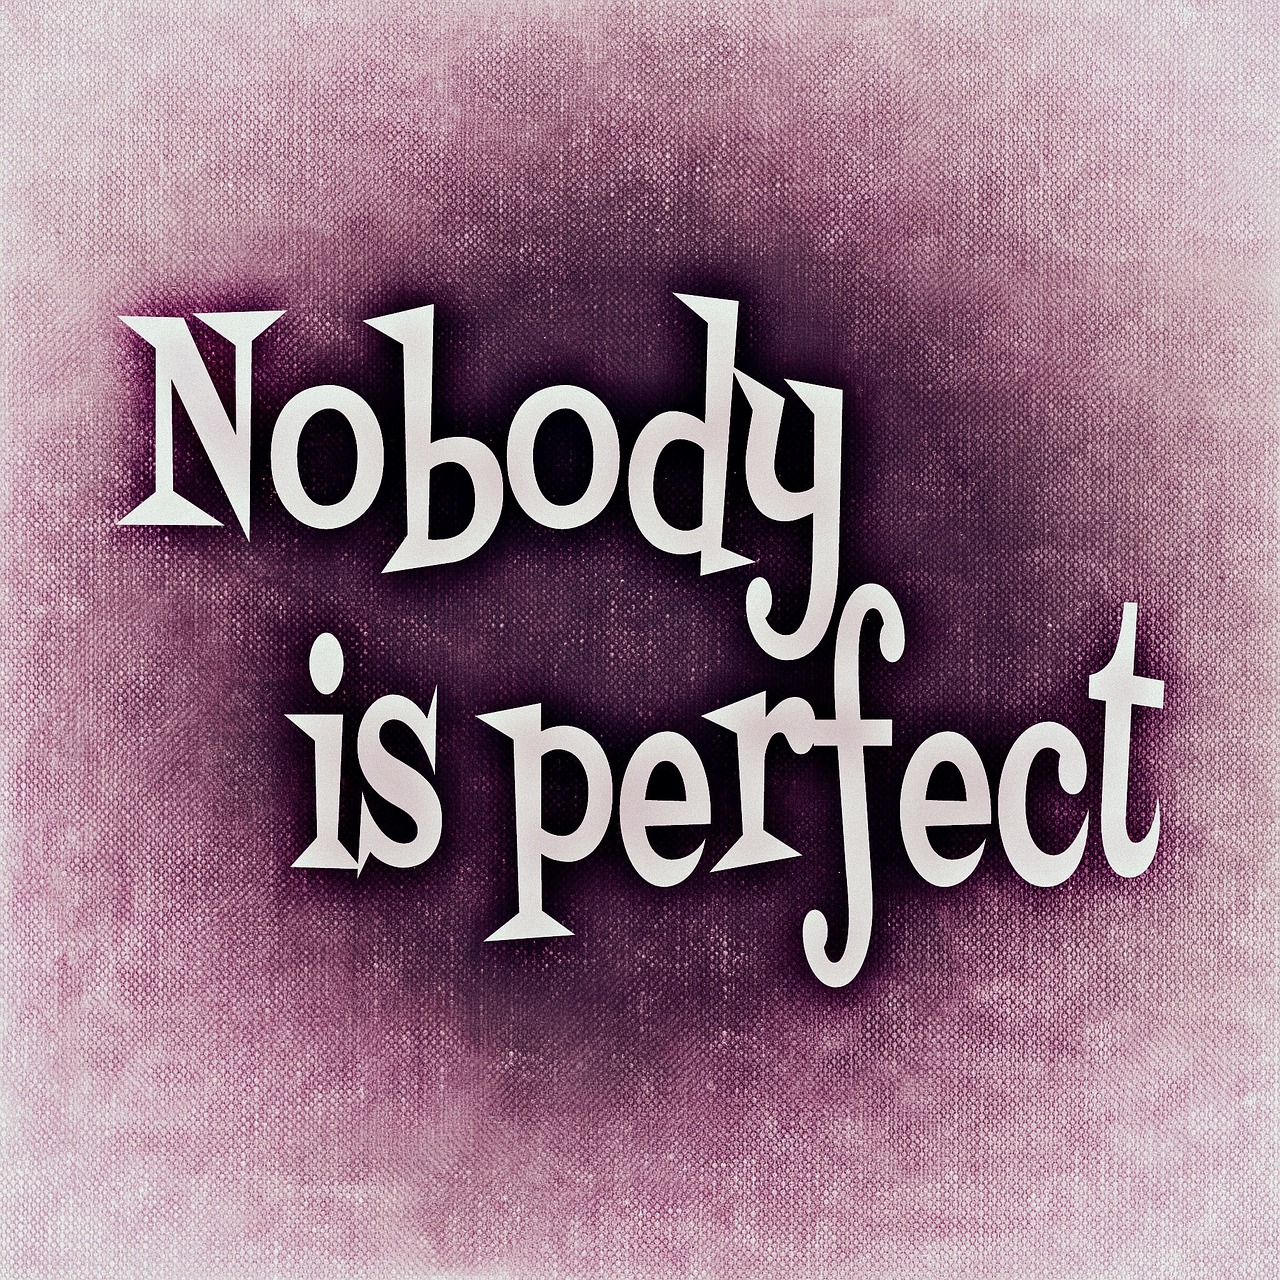 nobody is perfect saying perfect free photo